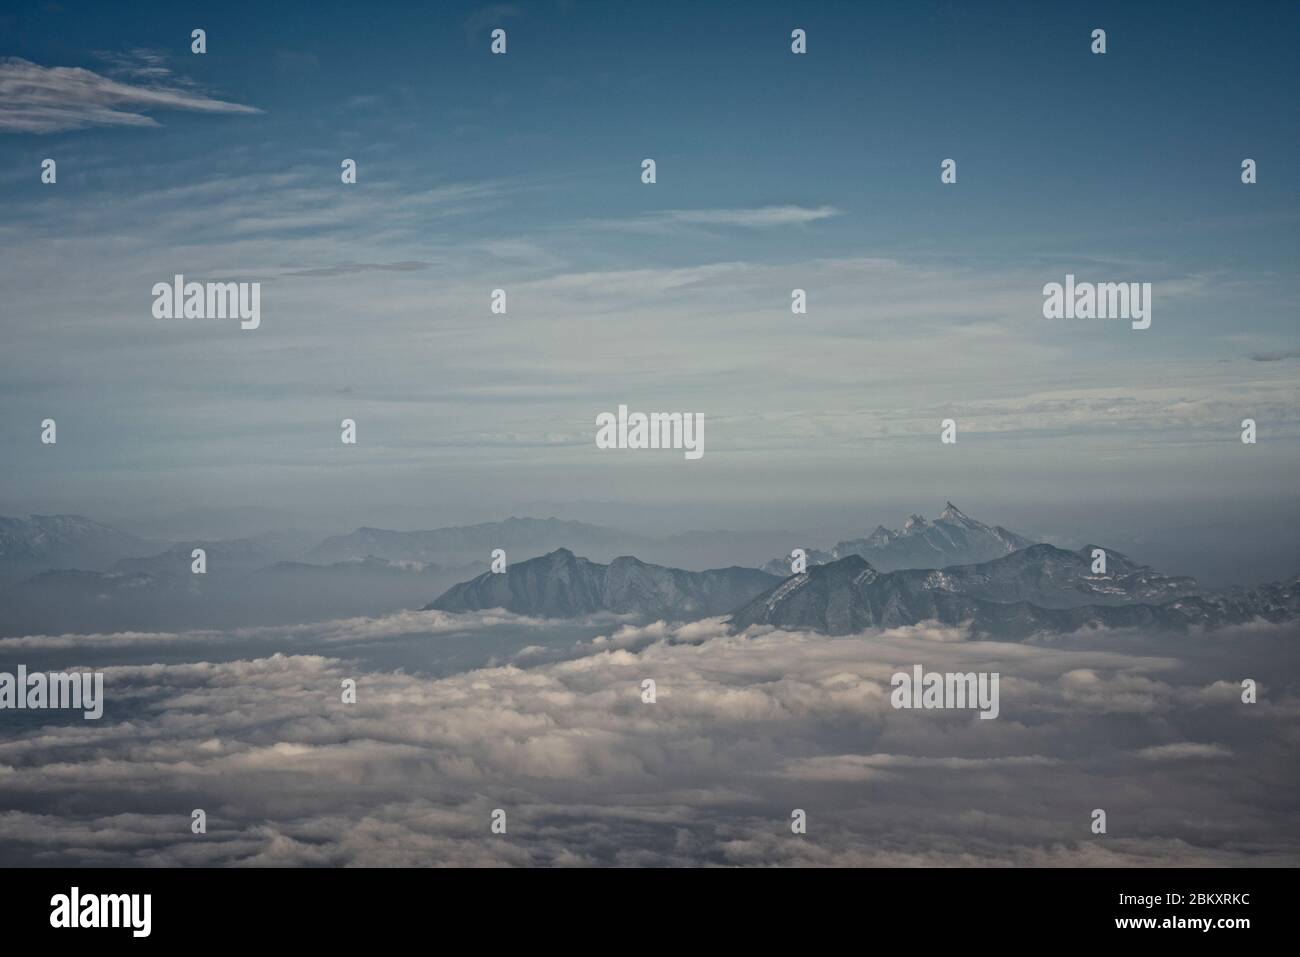 Top view of a mountain range in Mexico Stock Photo